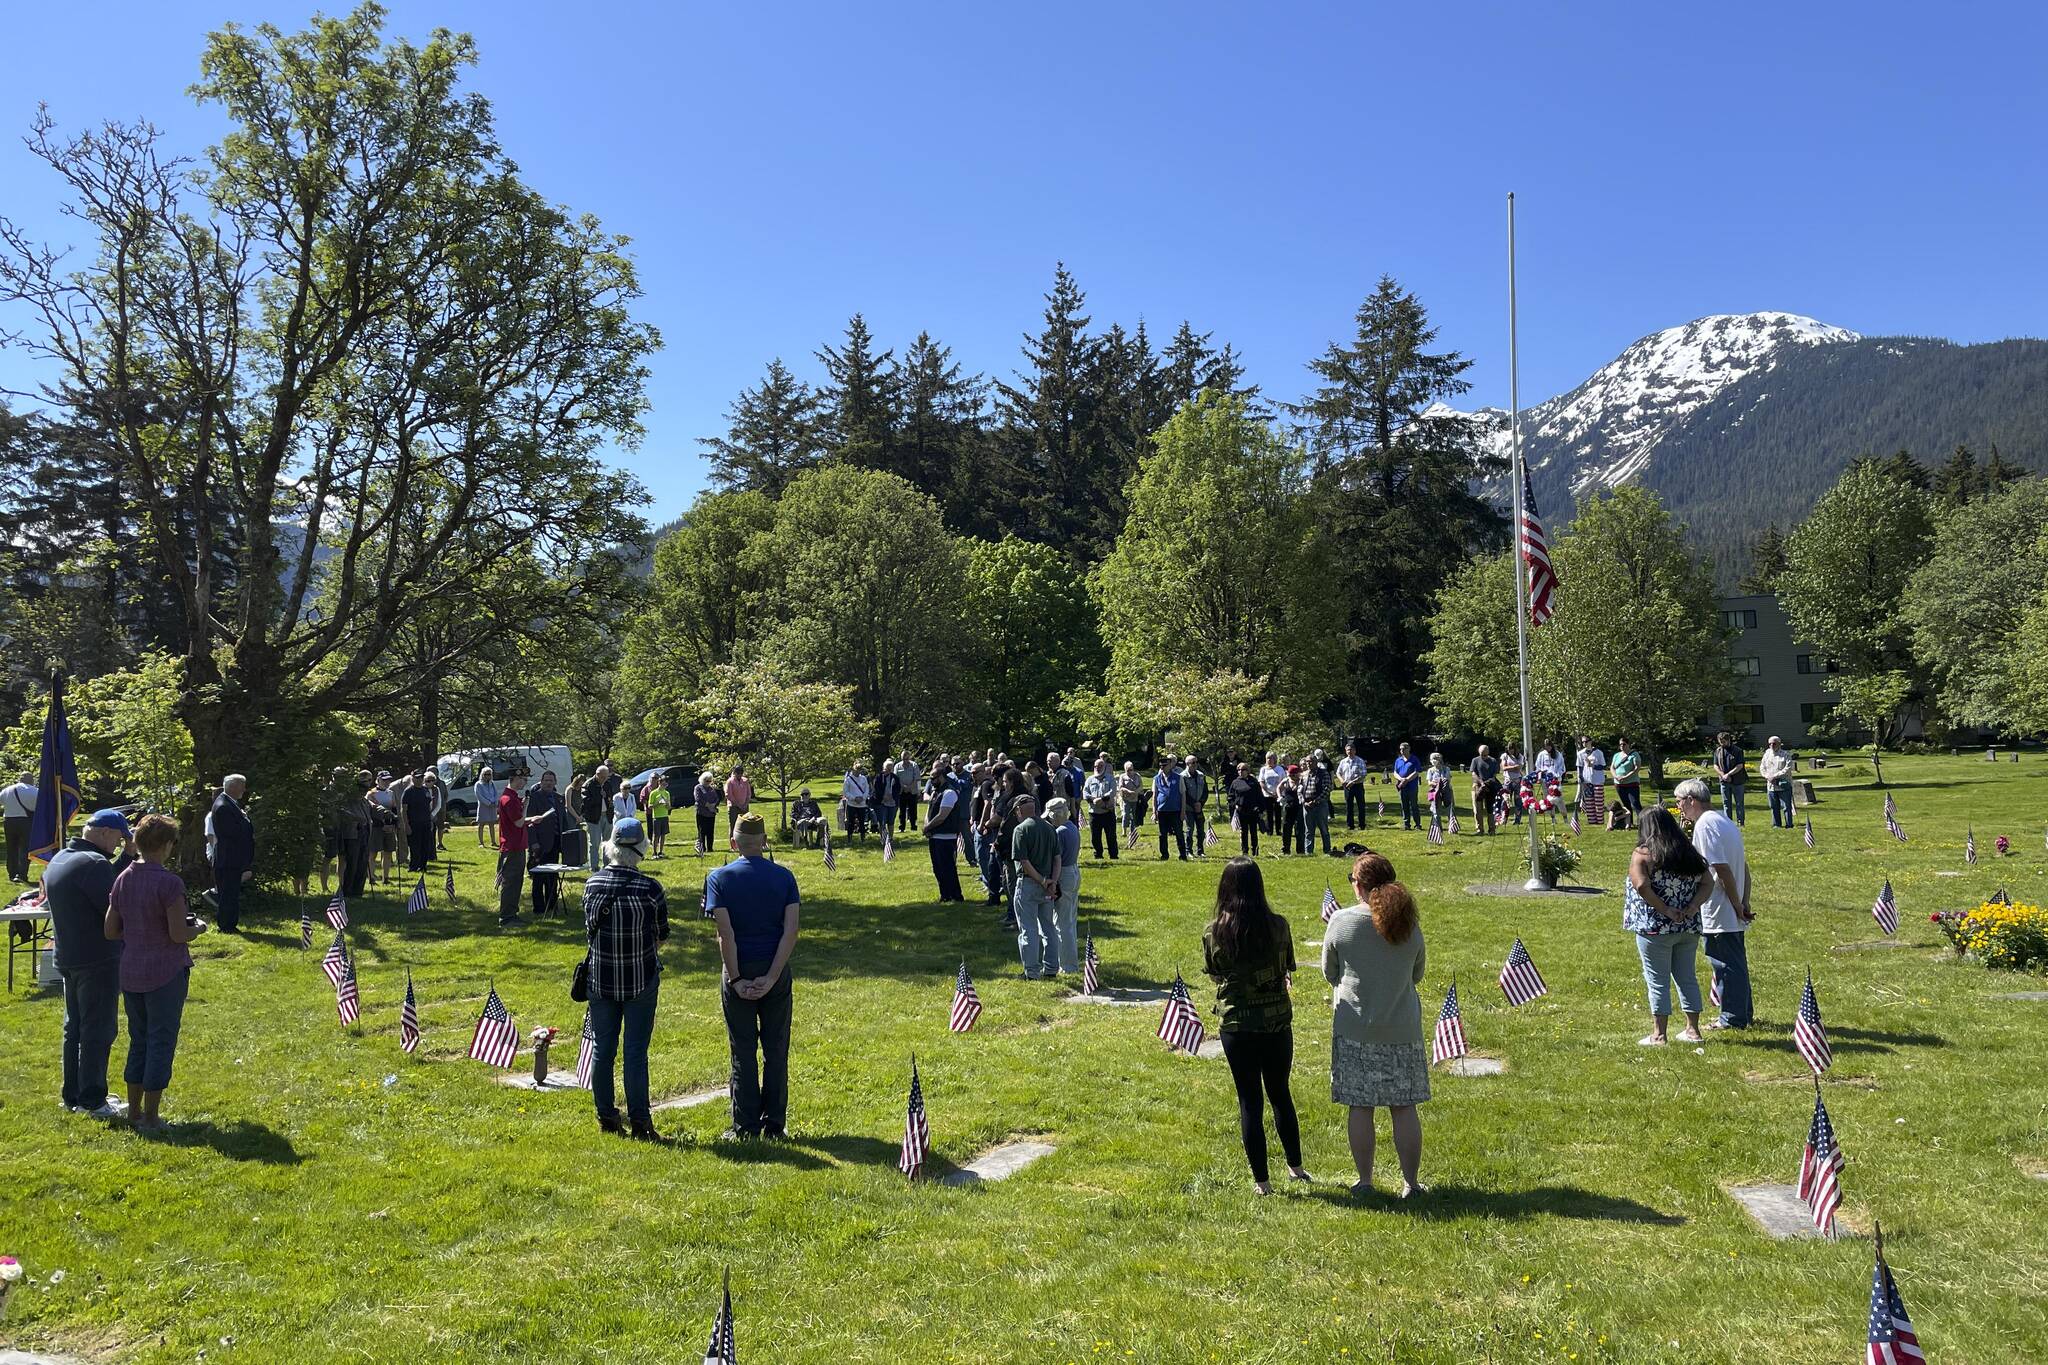 Dozens of Juneau residents attended a Memorial Day ceremony held by the Veterans of Foreign Wars at Evergreen Cemetery on May 30, 2022. (Michael S. Lockett / Juneau Empire)